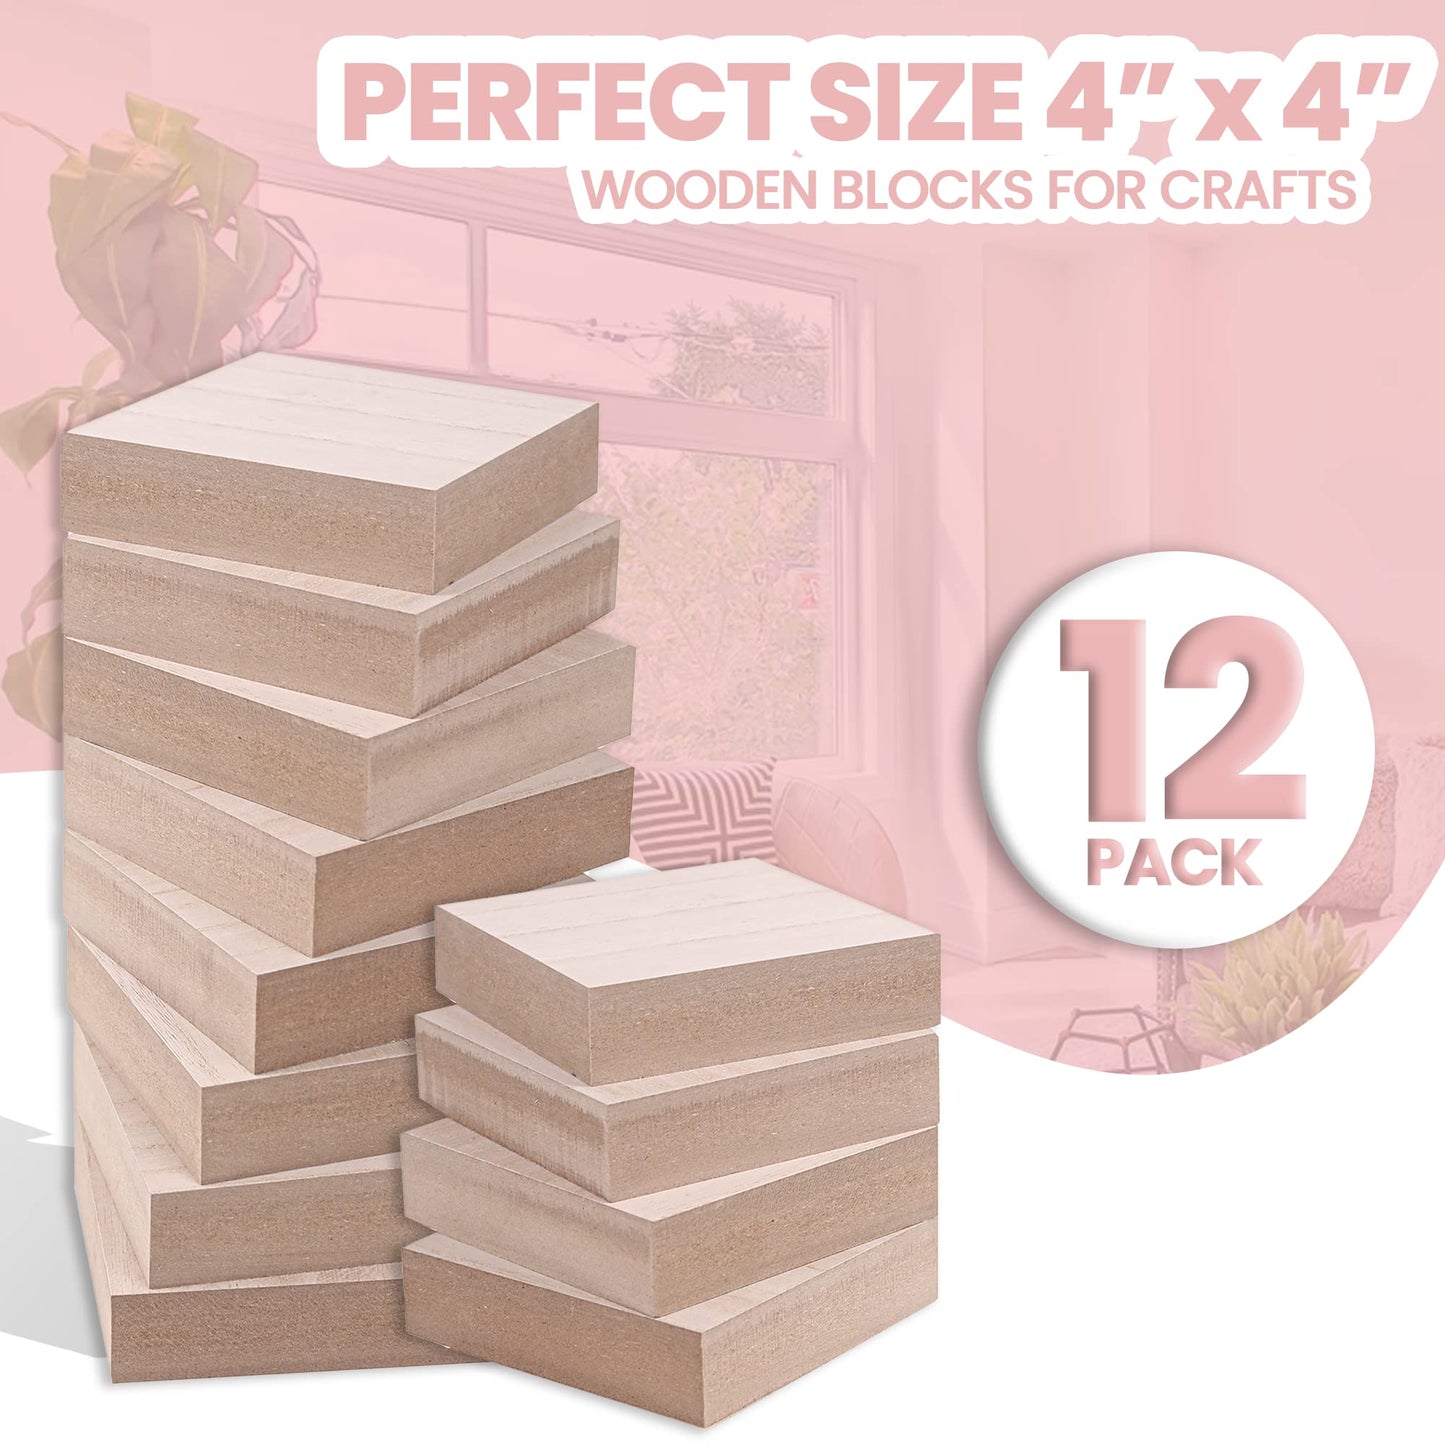 (12-Pack) - 4” x 4” Wooden Blocks for Crafts - 1-Inch Thick Square MDF Blocks - Smooth Surface with Wood Grain Pattern - Highly Customizable Blank Wood Squares